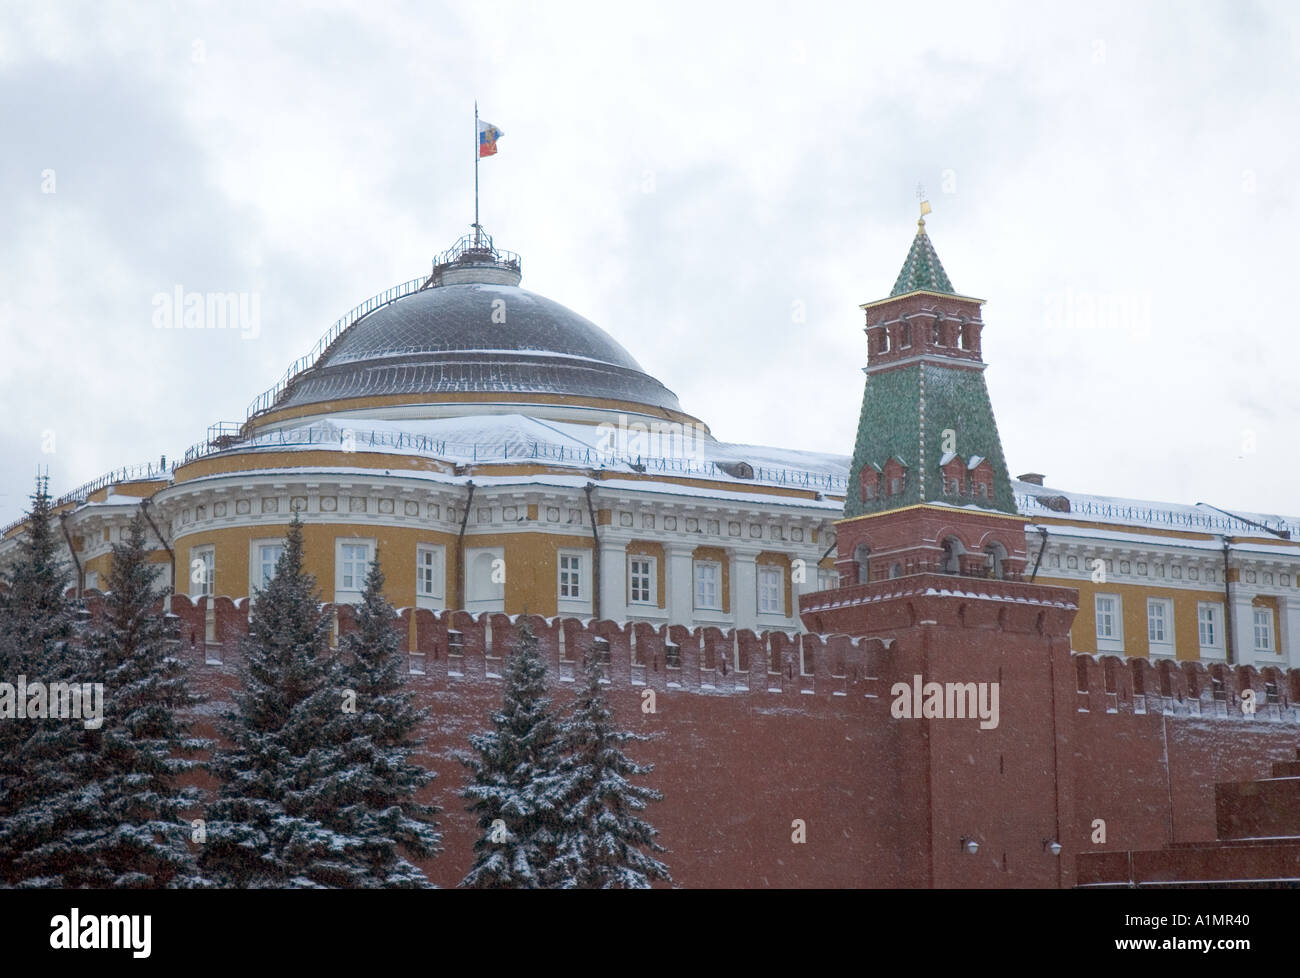 Looking up at the Kremlin on Red Square in Moscow Stock Photo